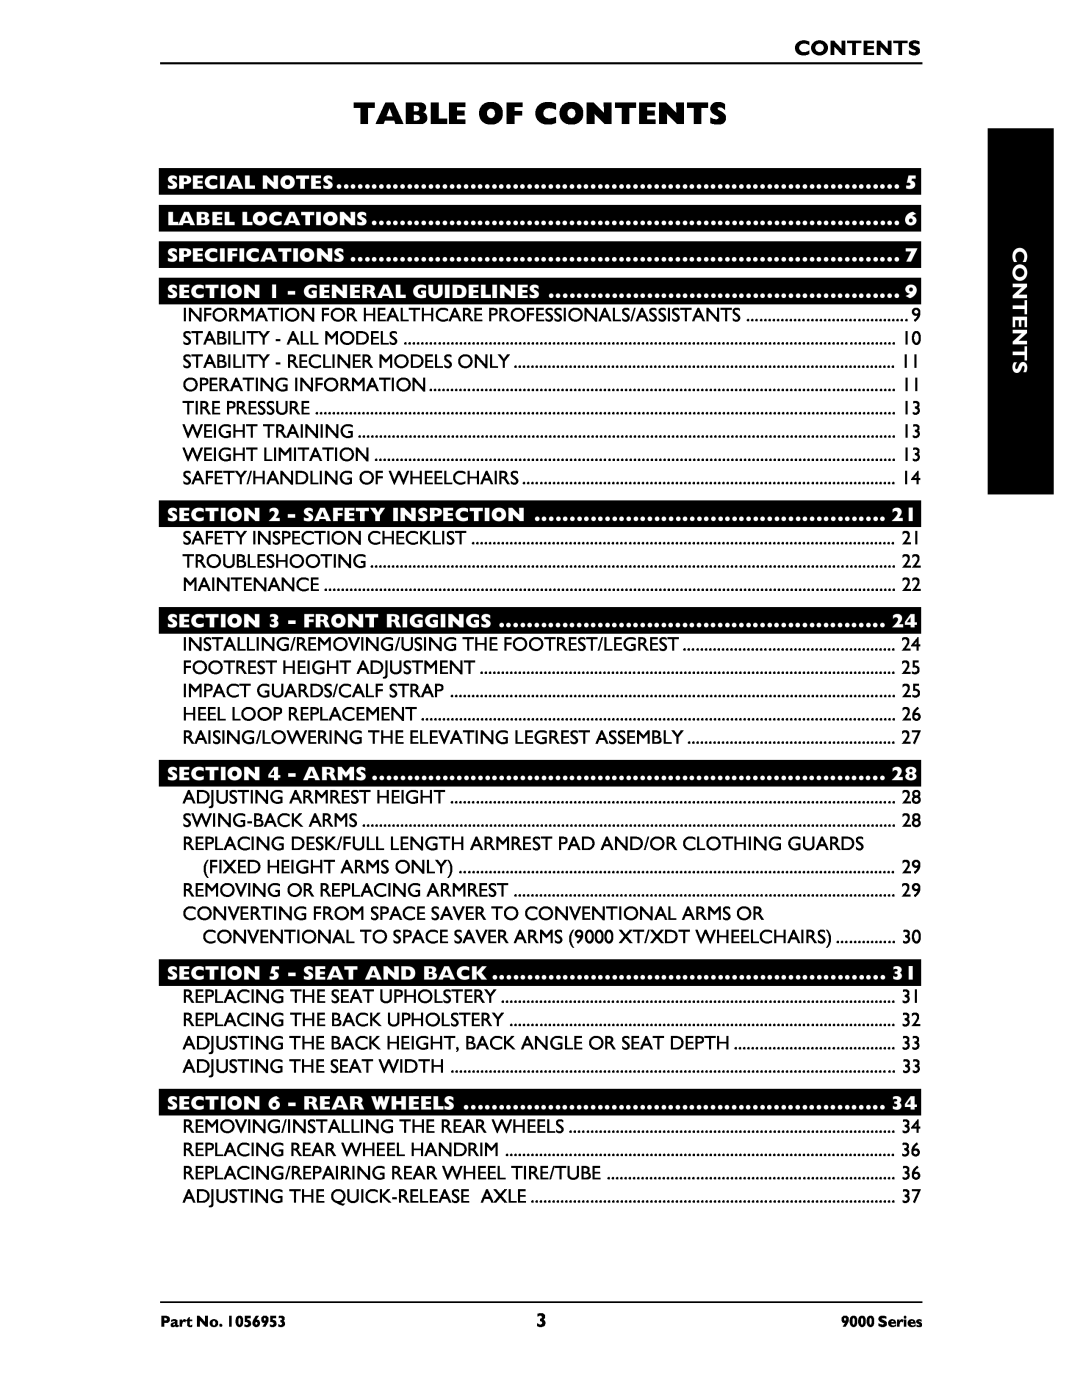 Invacare 9000 XDT Table Of Contents, Special Notes, Label Locations, Specifications, General Guidelines, Safety Inspection 